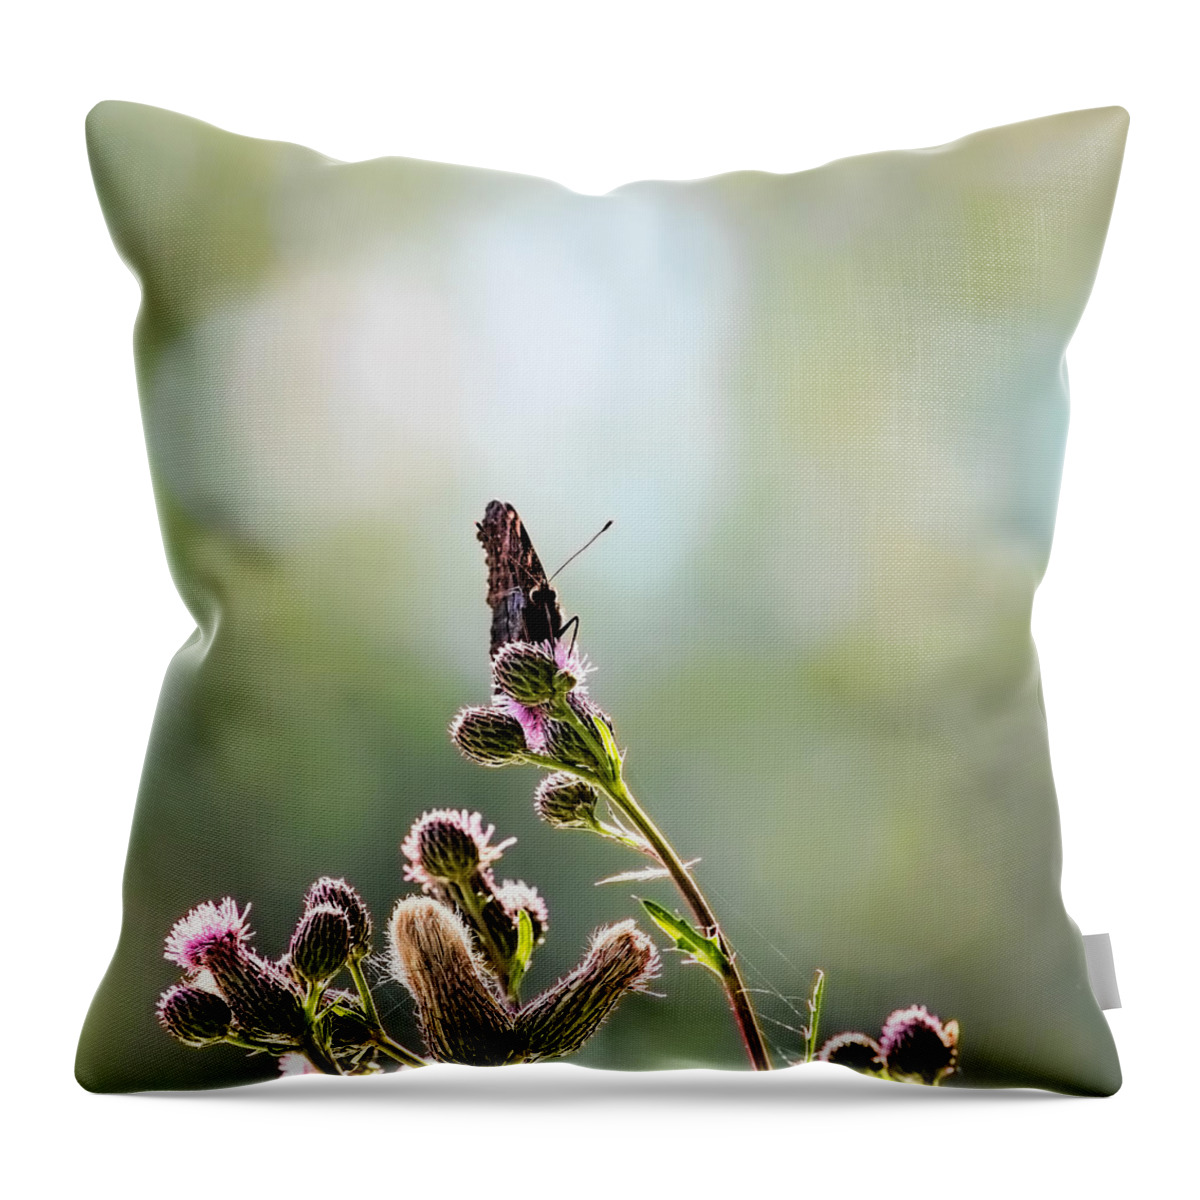 Demon Throw Pillow featuring the photograph Demon by Leif Sohlman